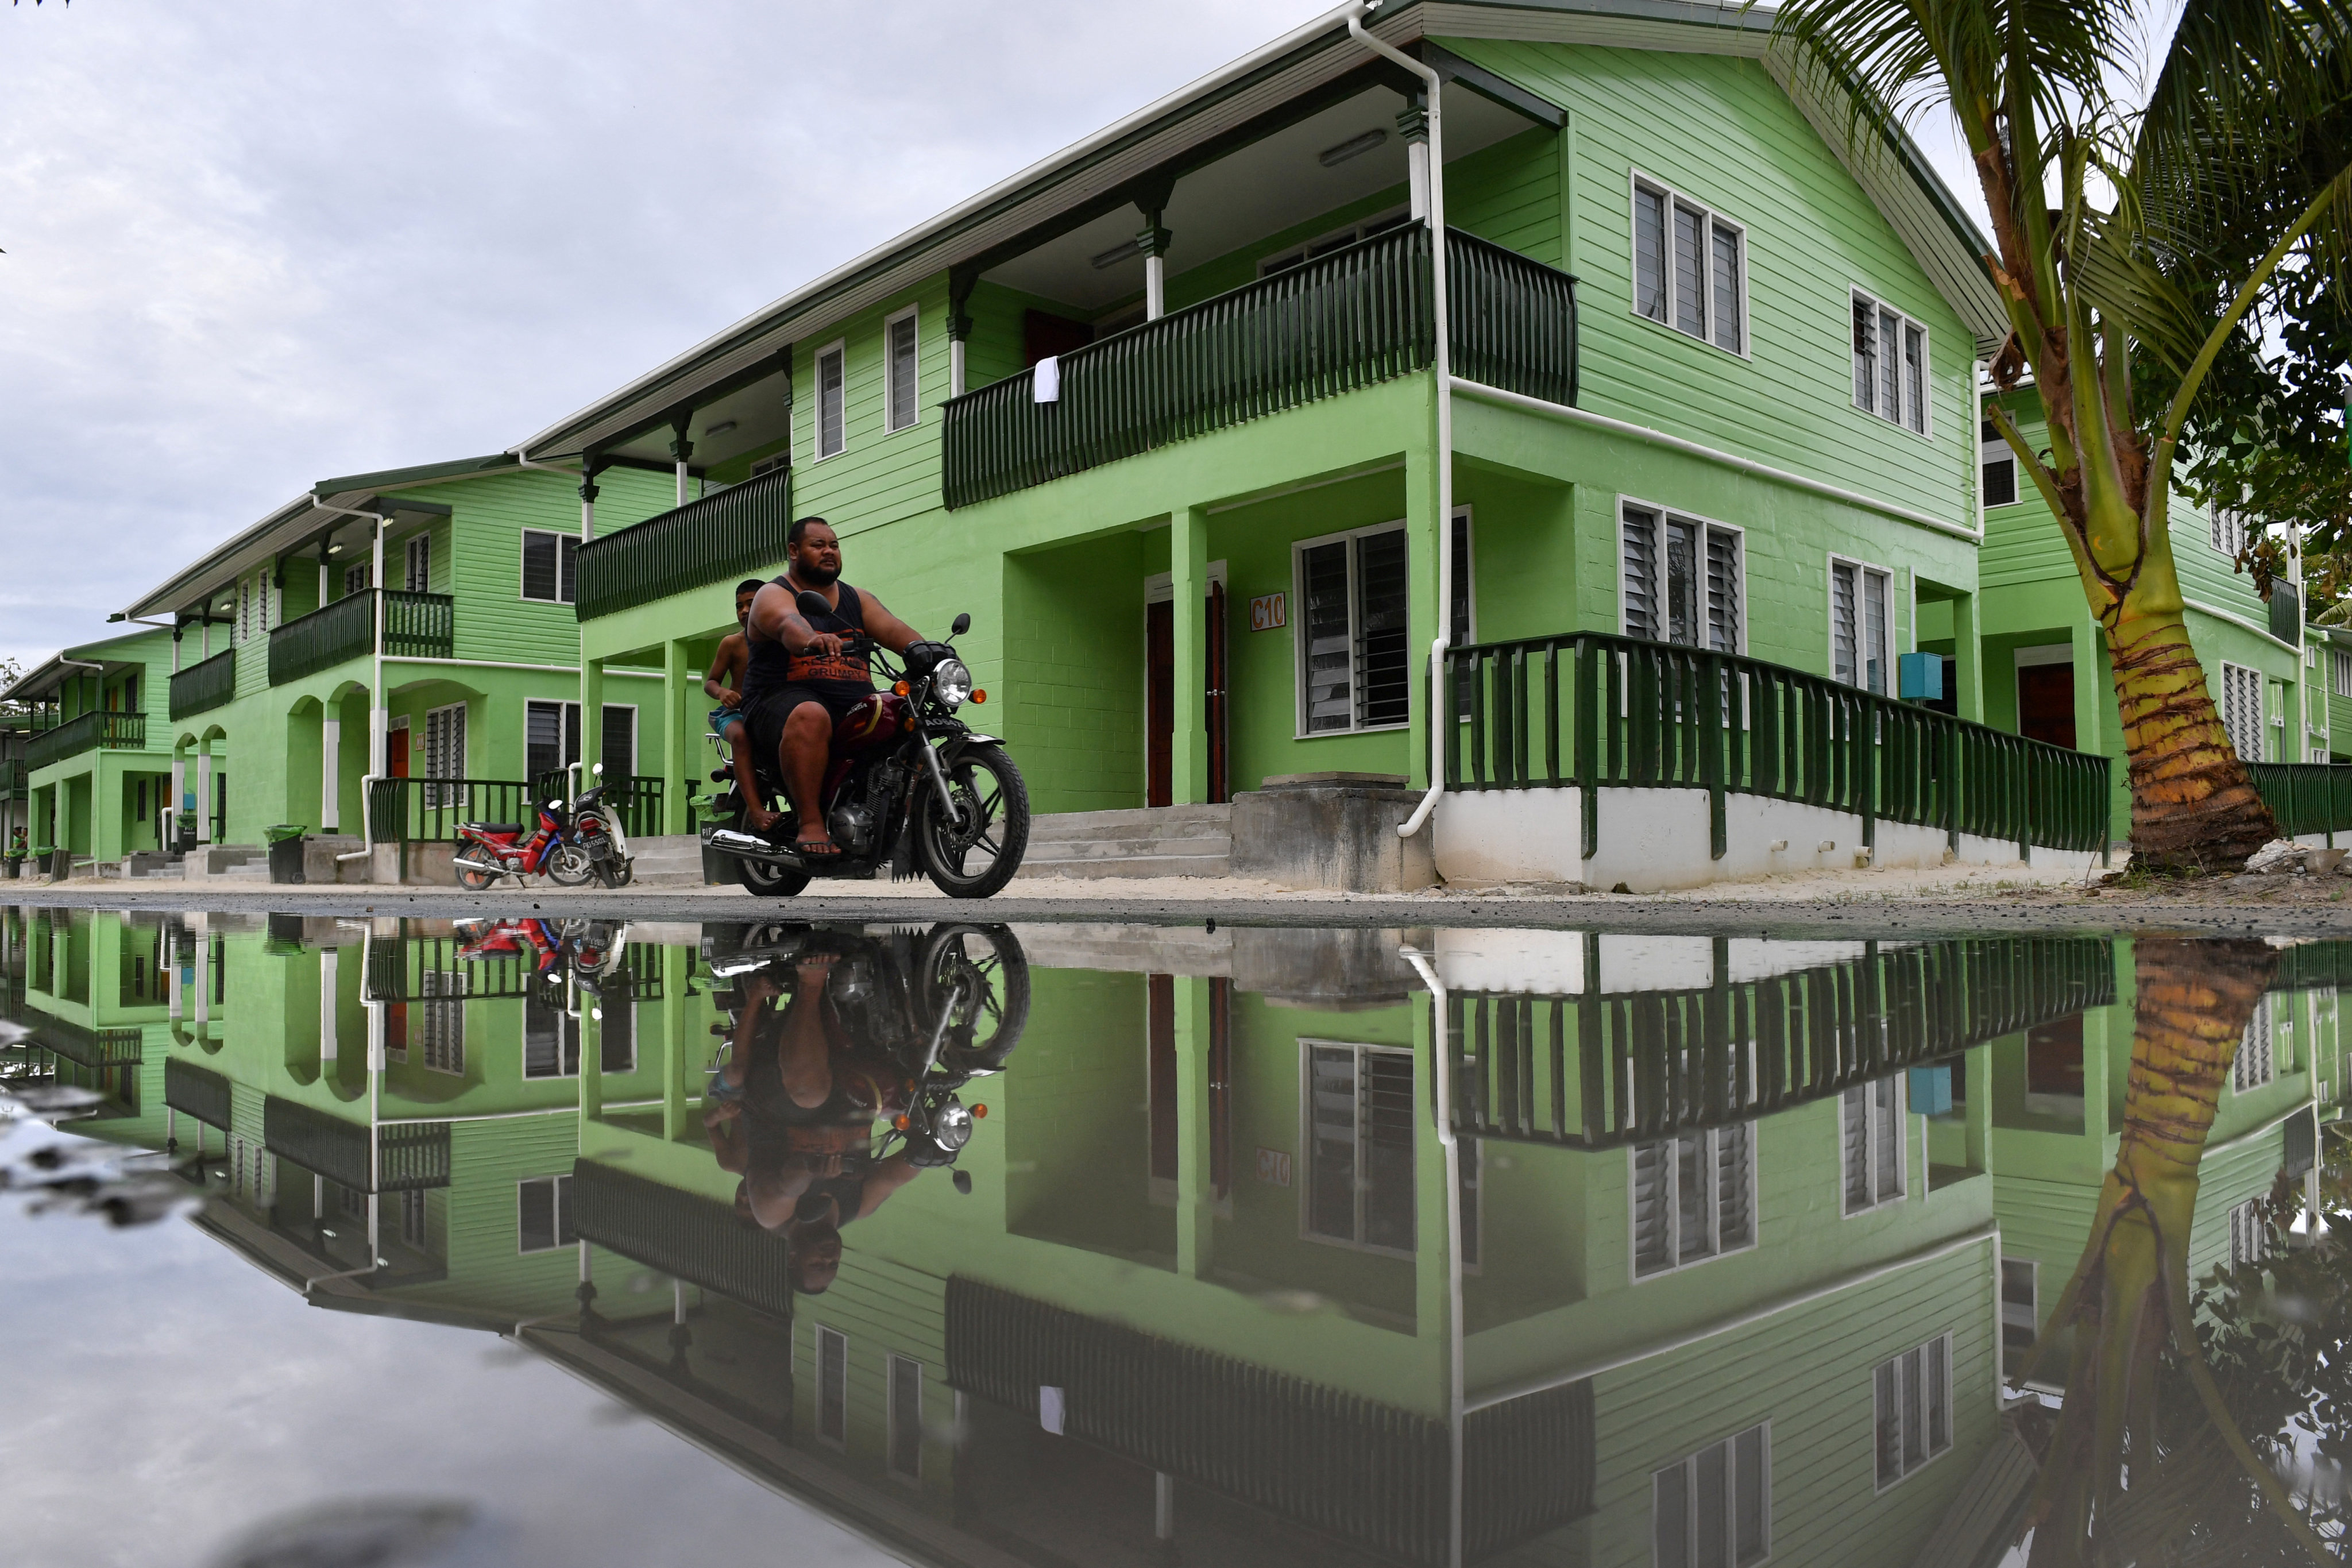 A person rides past a puddle of water in Funafuti, Tuvalu. Photo: AAP via Reuters